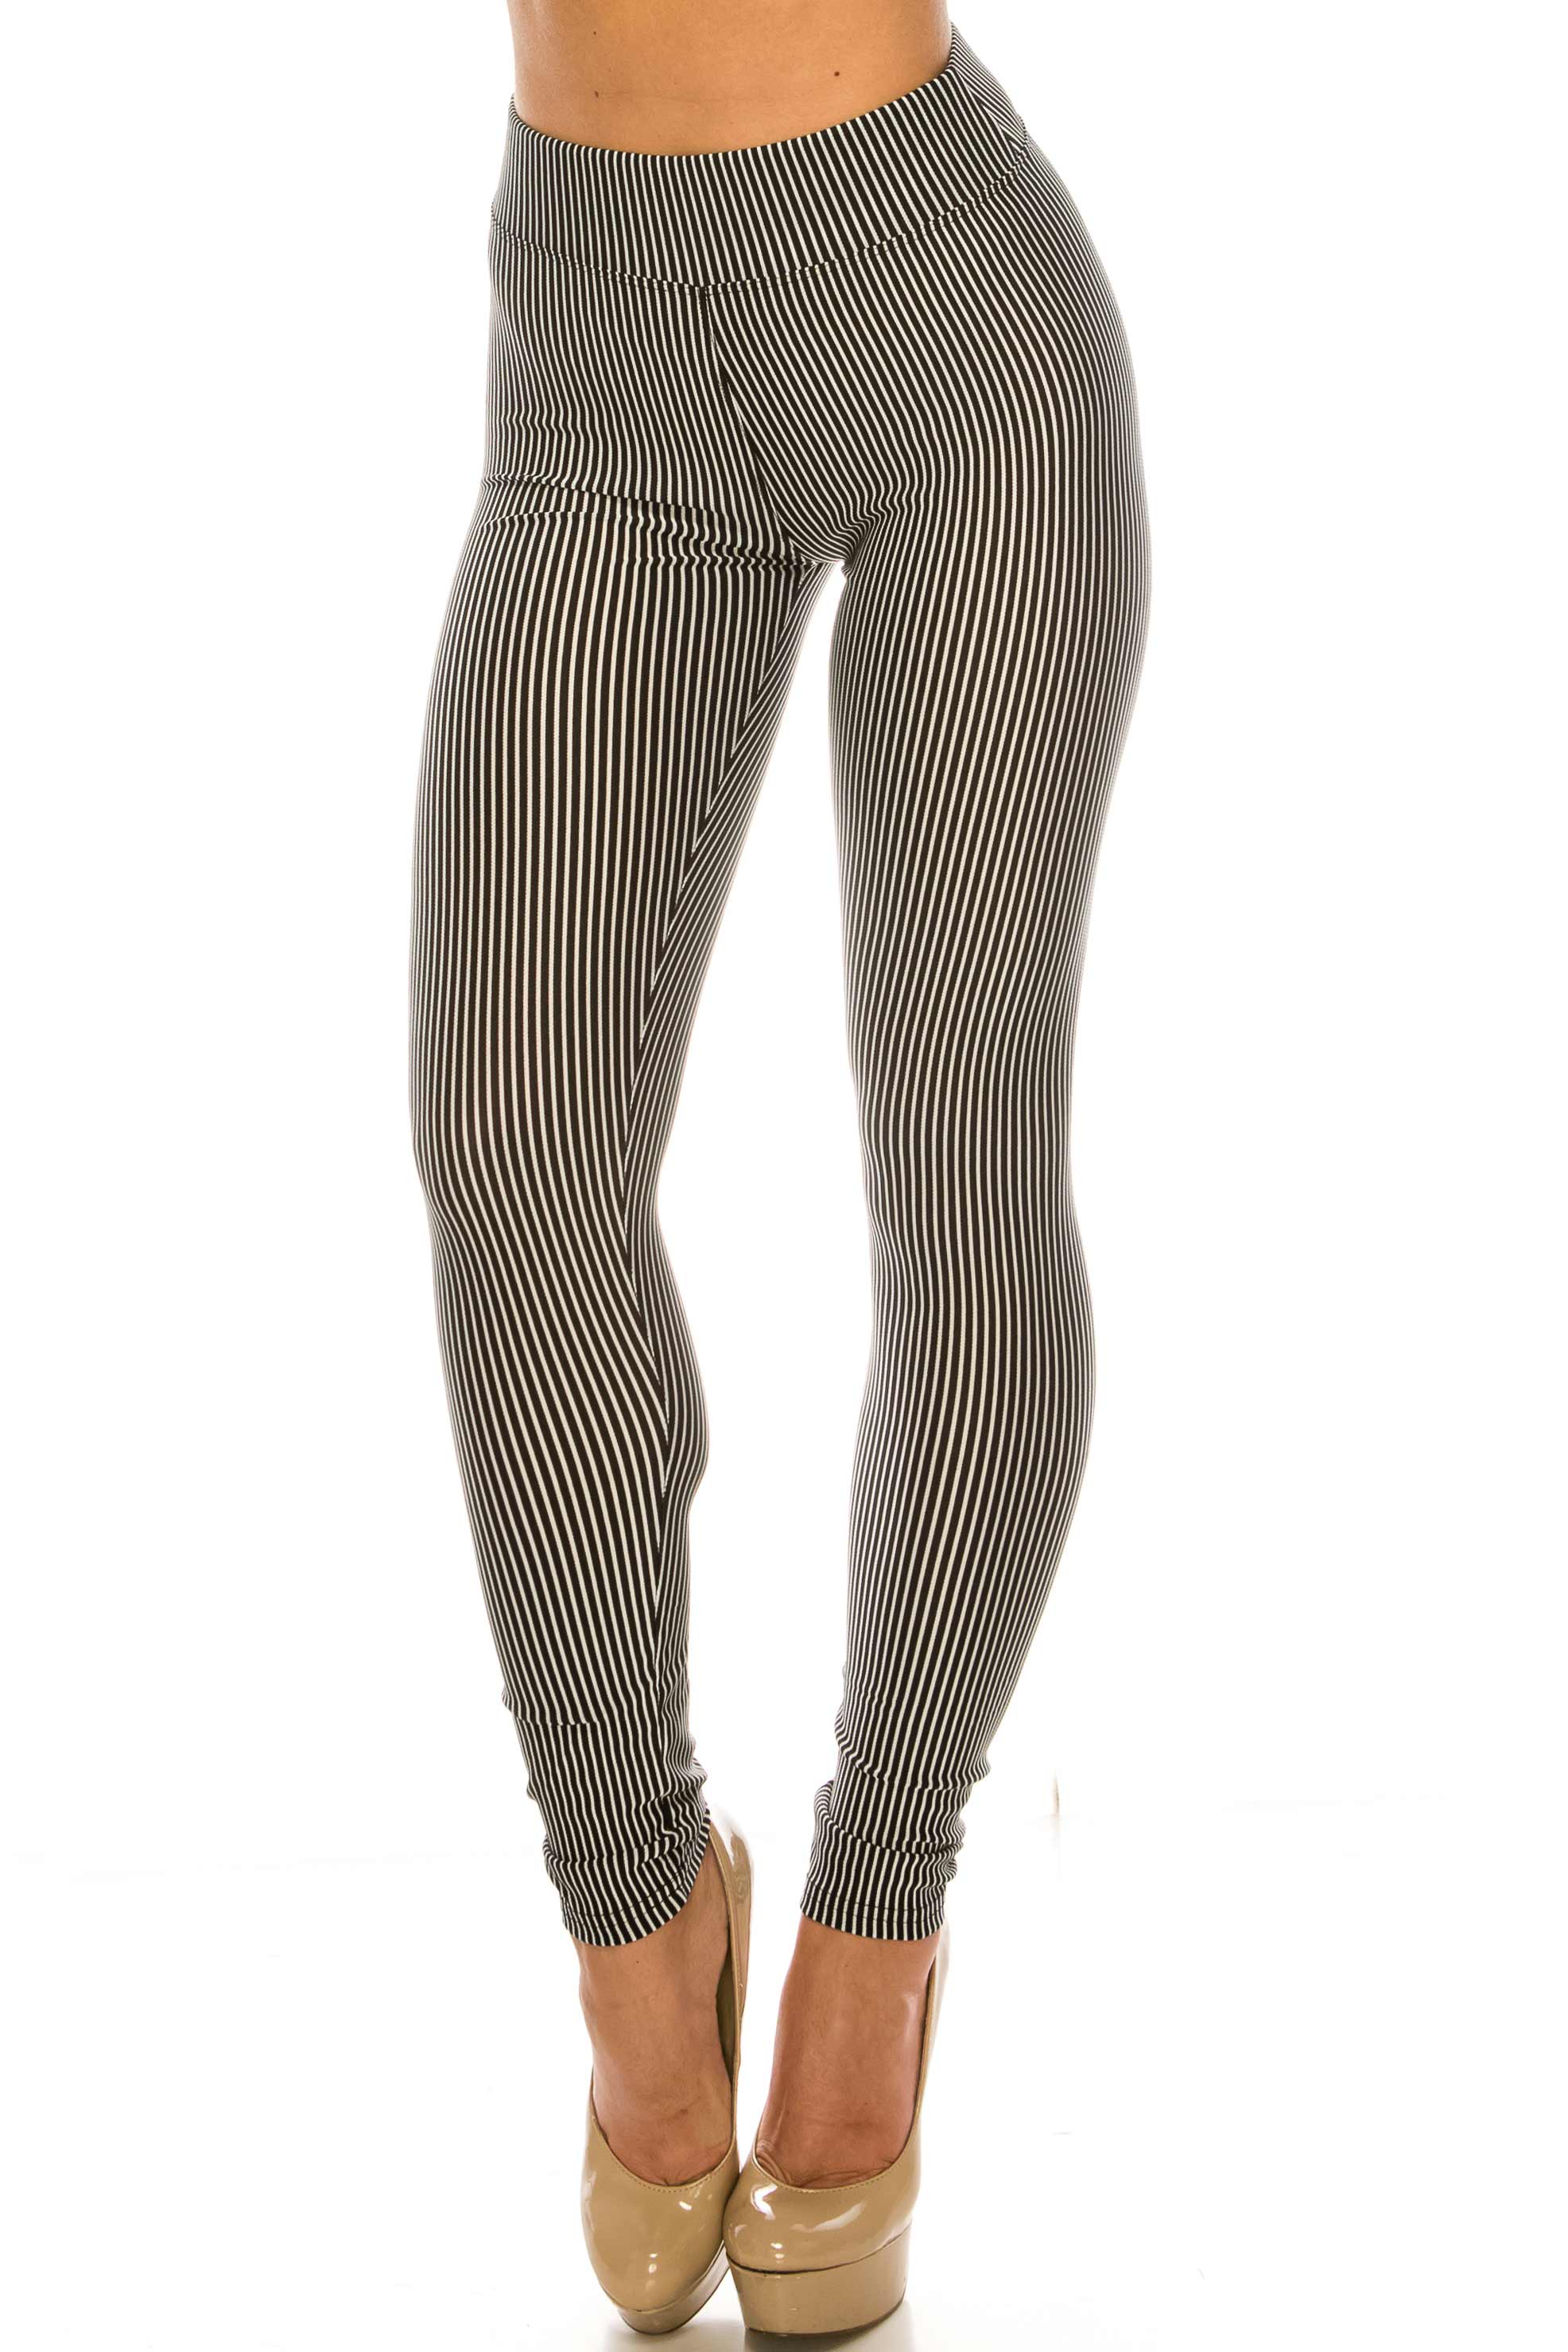 Wholesale White Stripe Accent High Waisted Plus Size Leggings - Thick